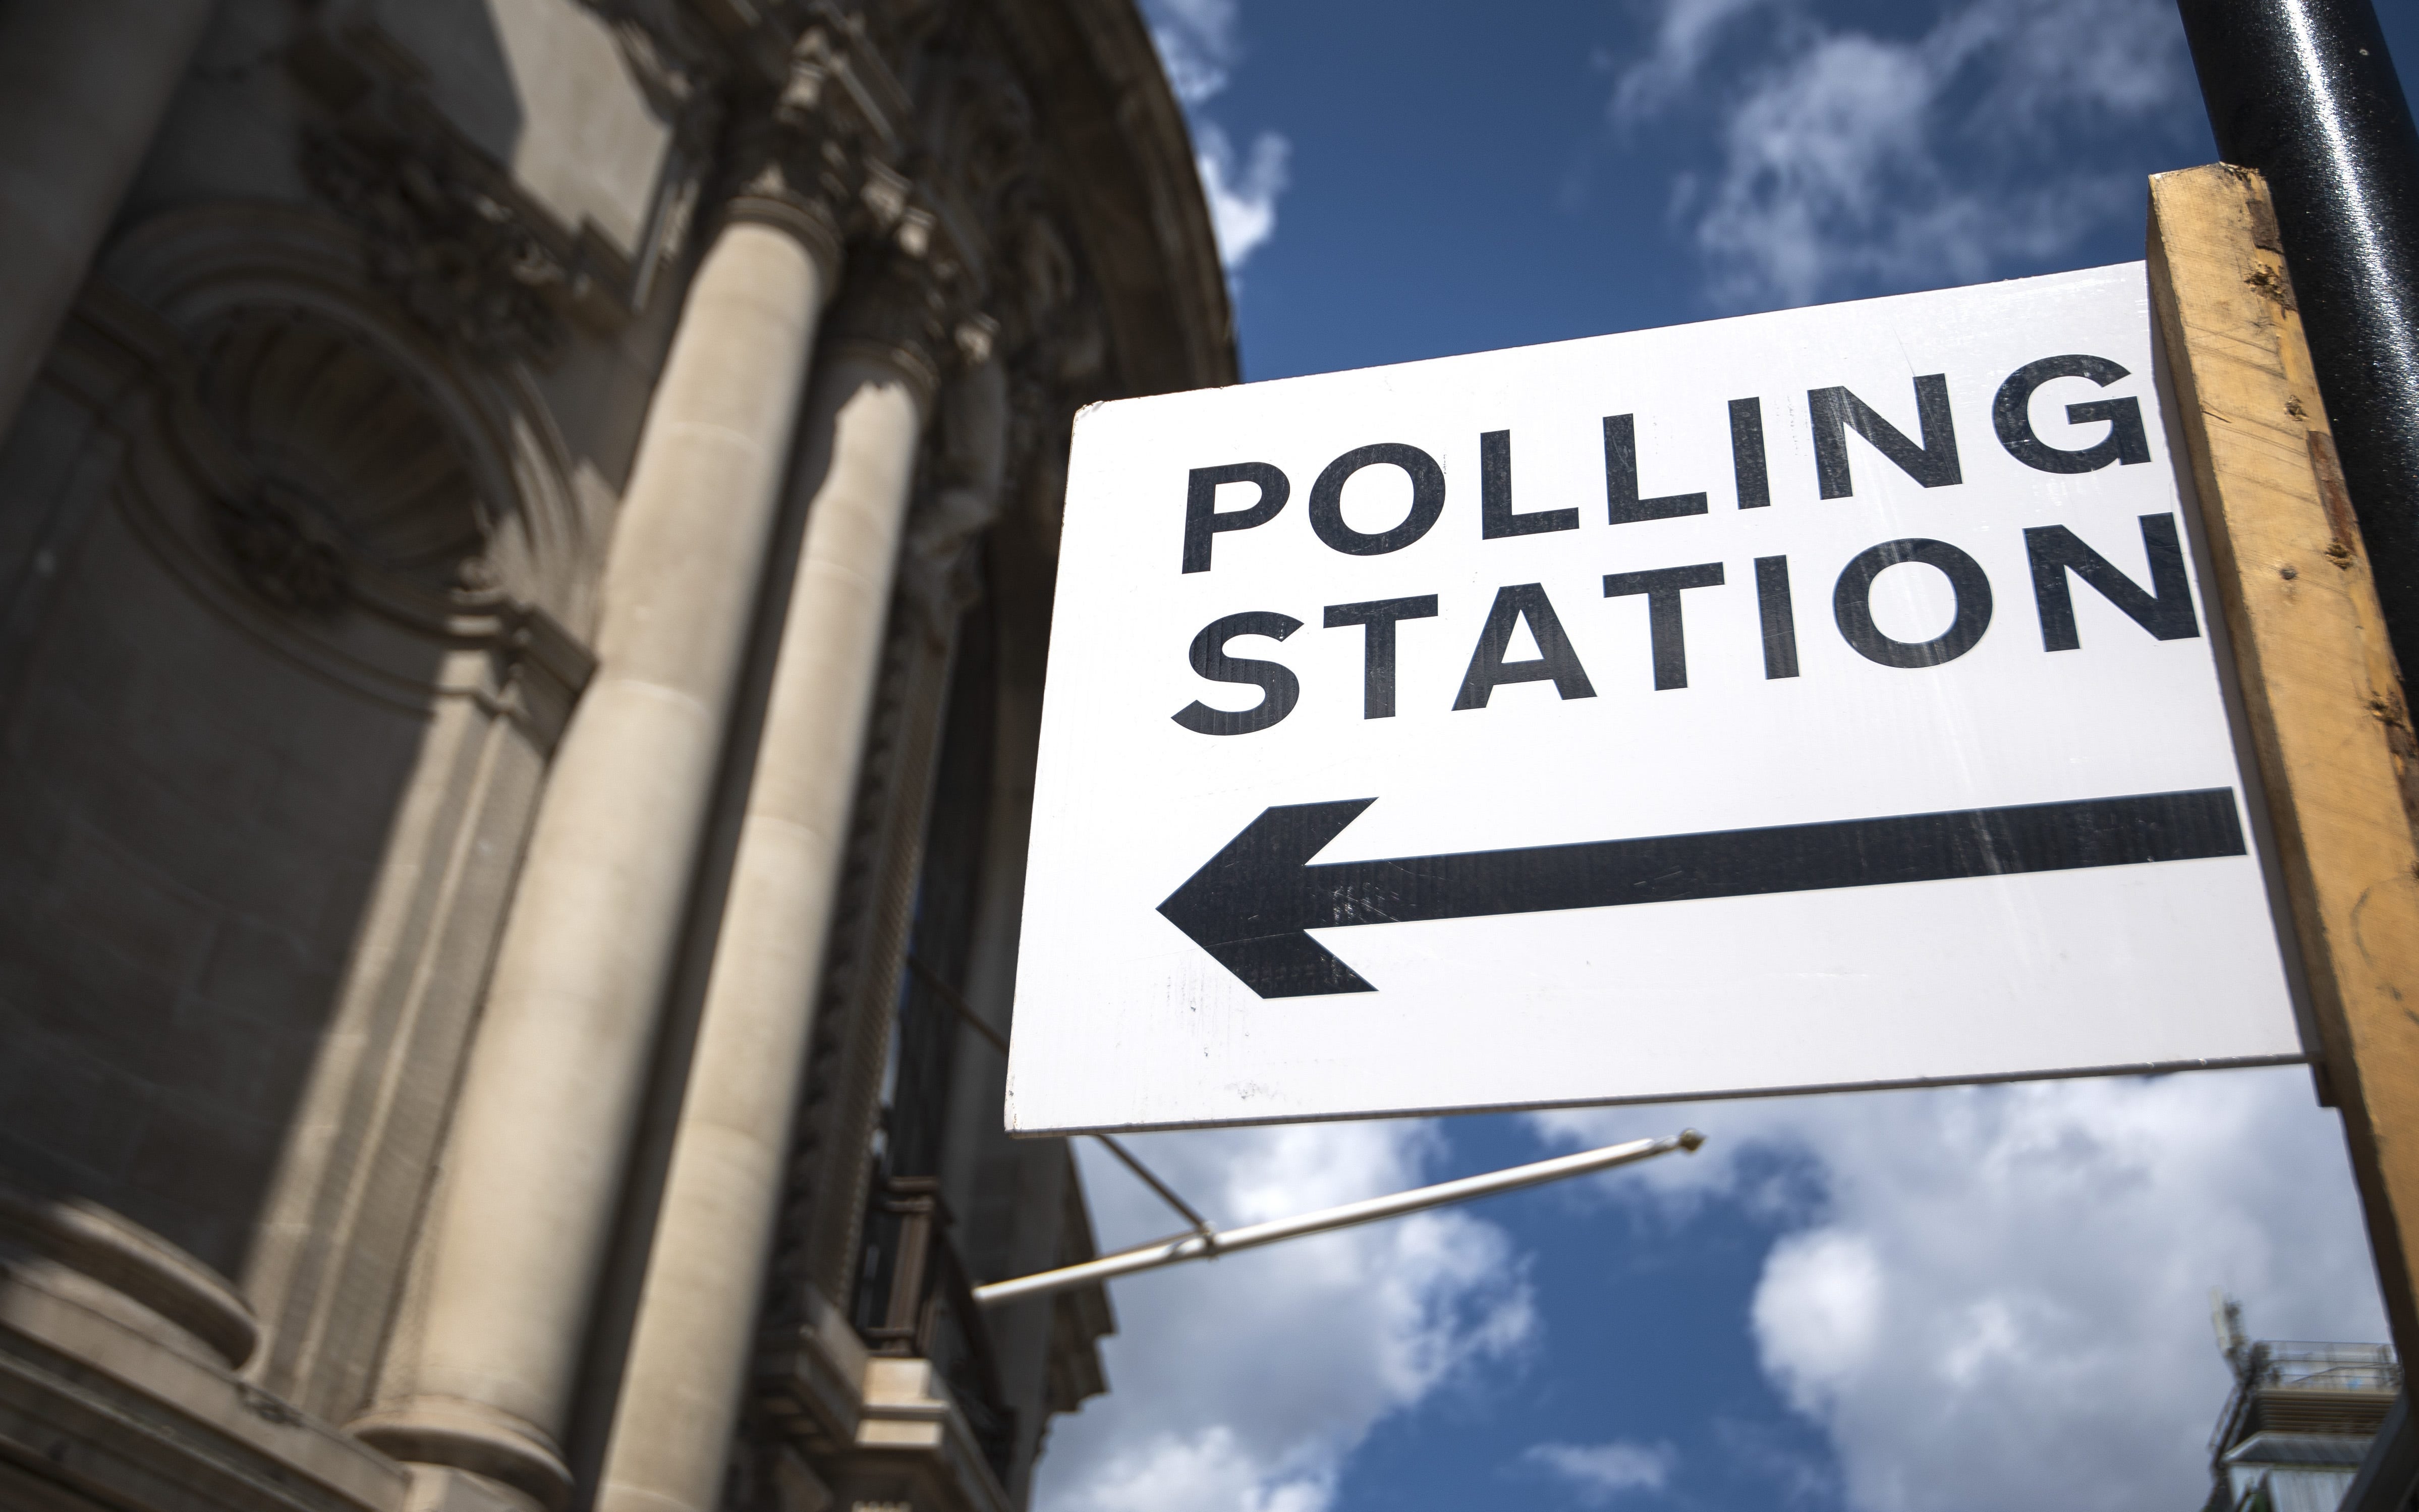 Polls open across the country for local elections